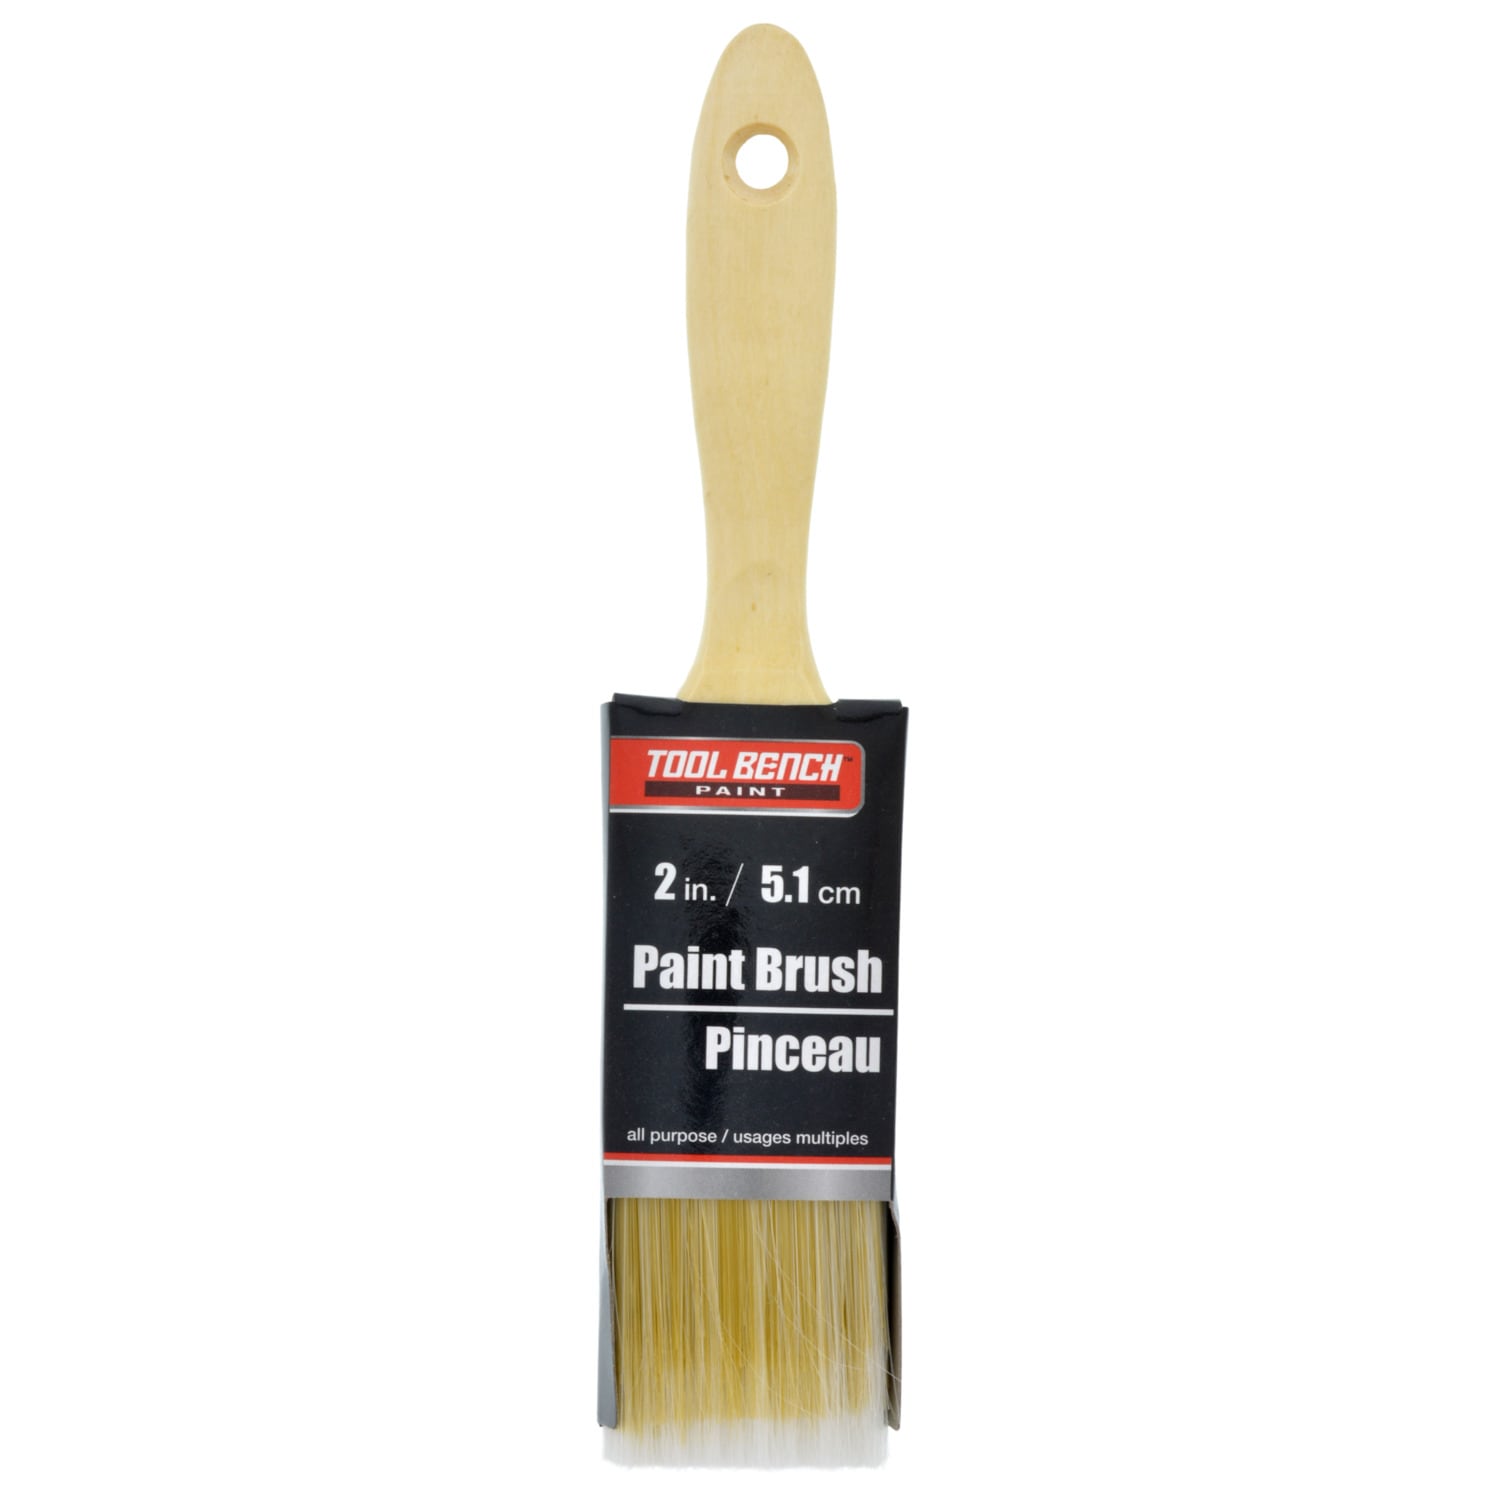 View Tool Bench Paint Brushes with